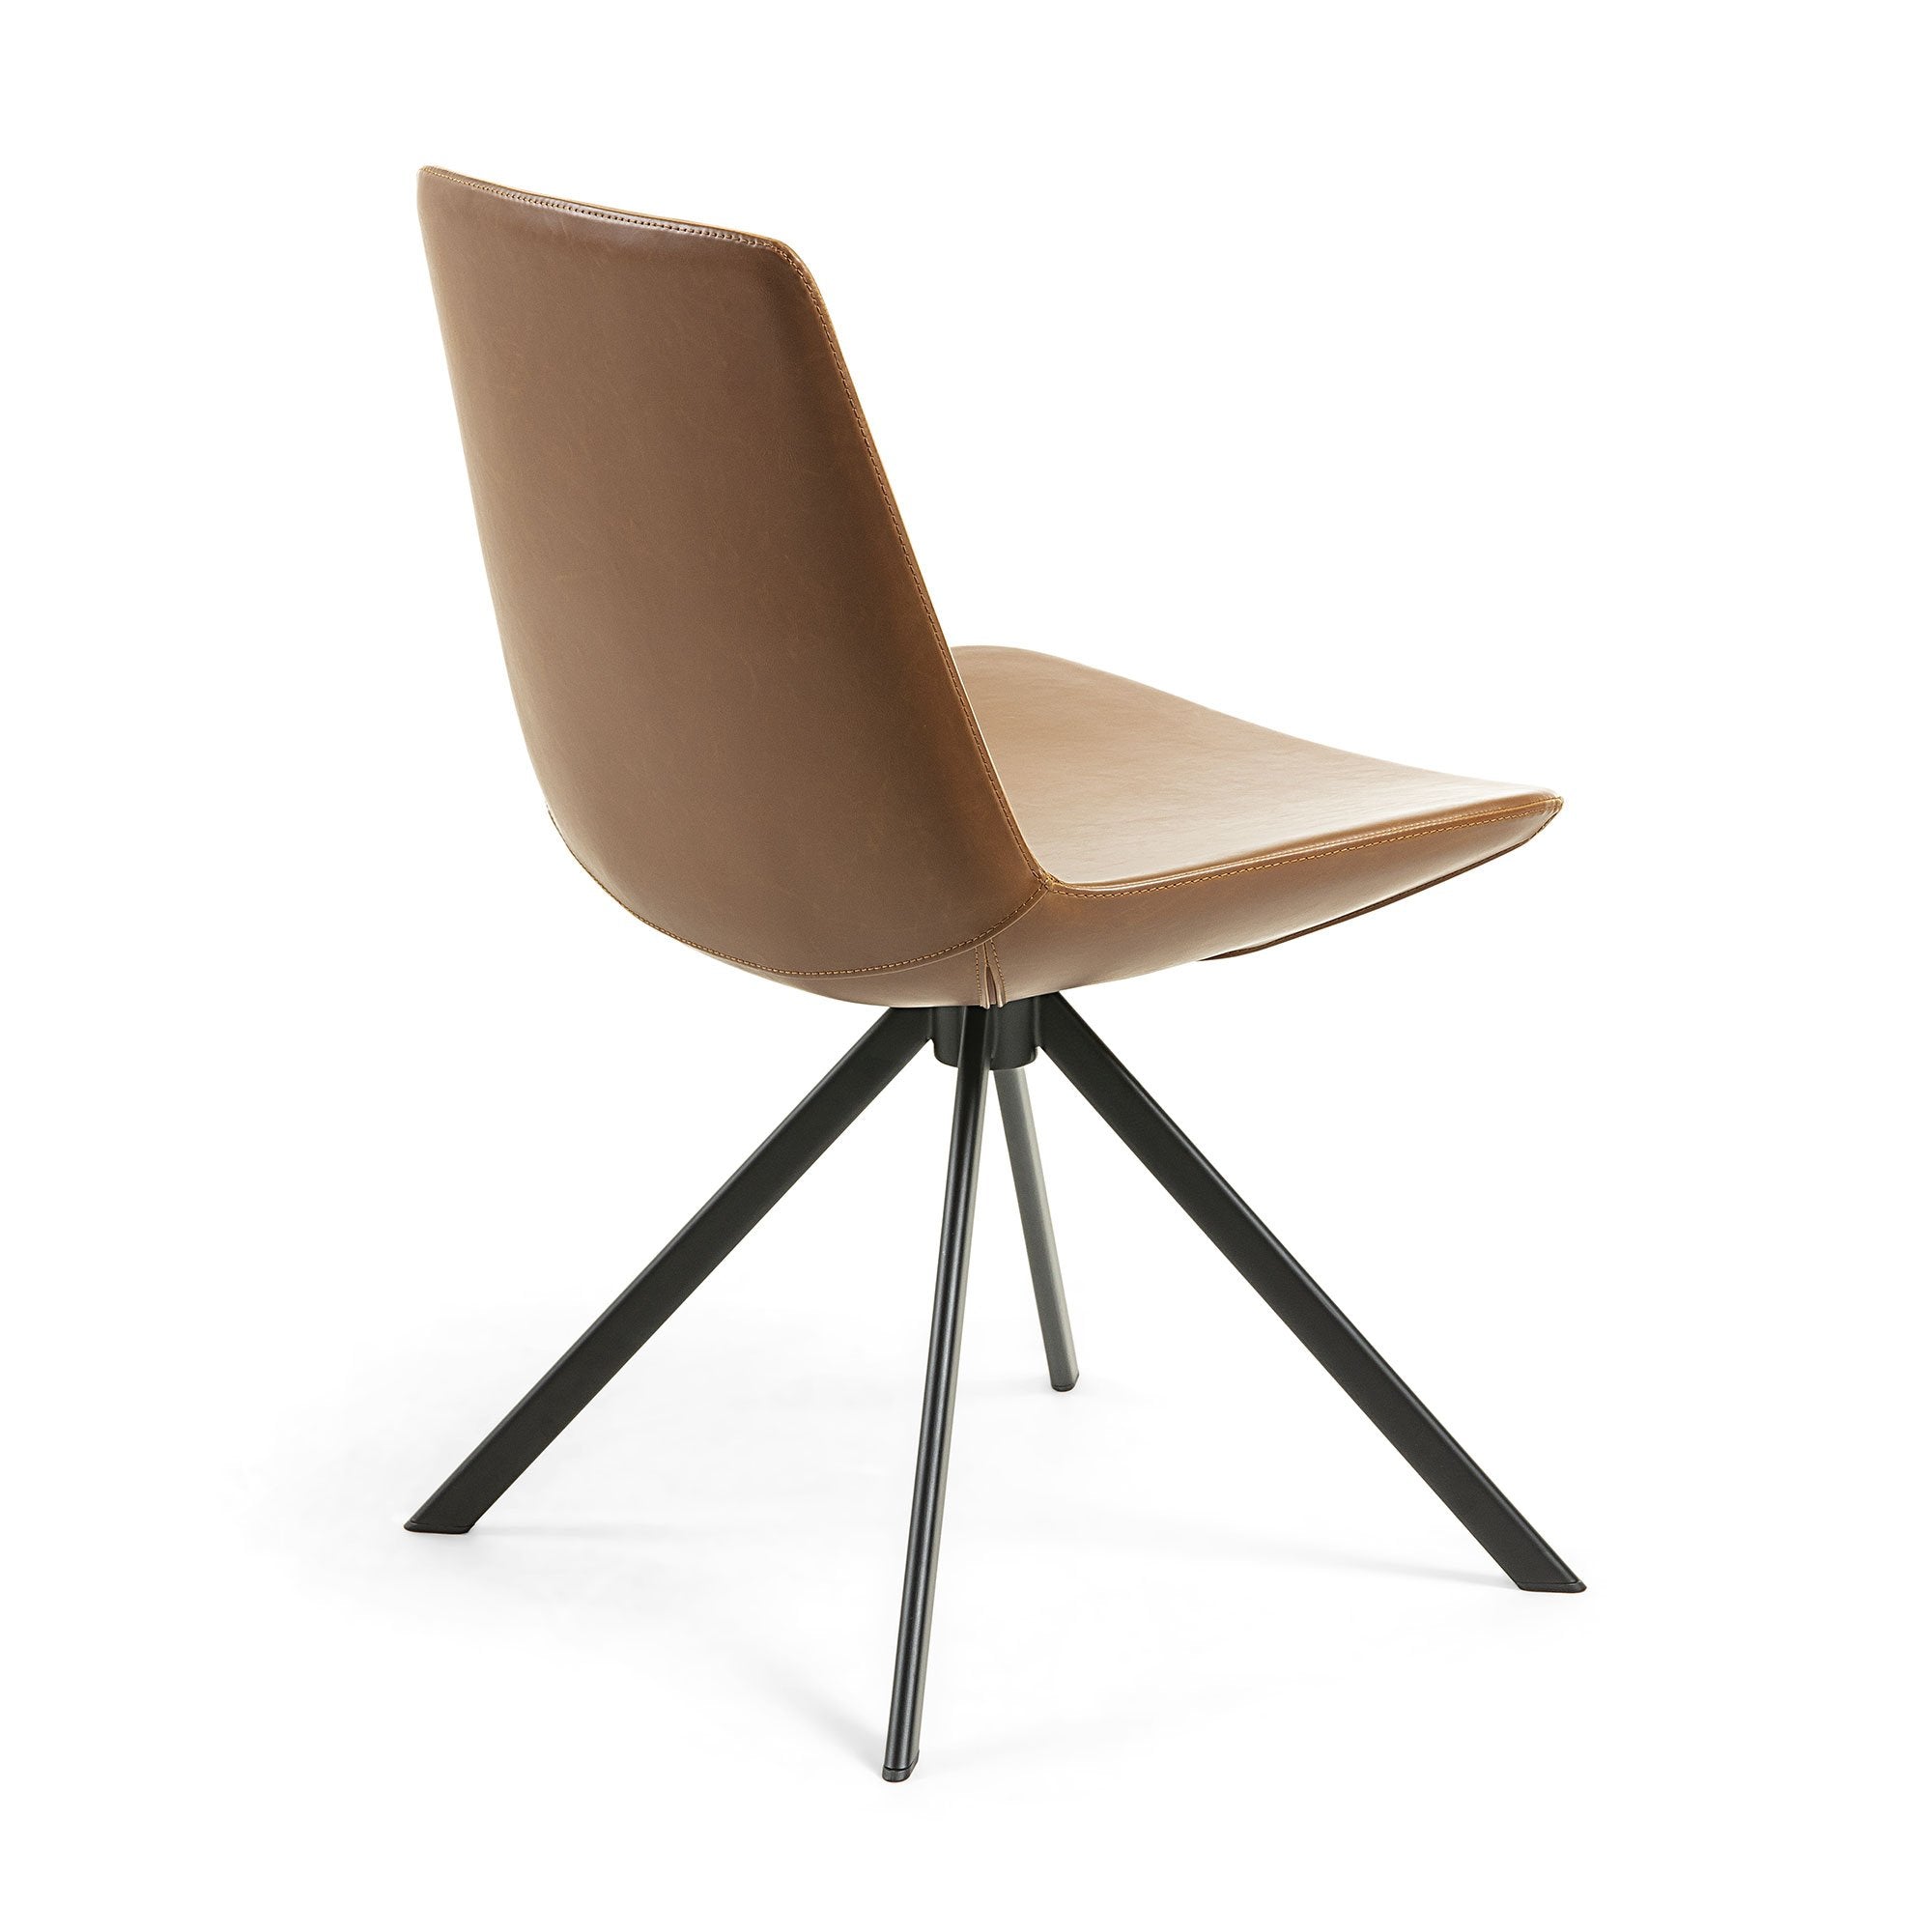 Amelia Leather Dining Chair - Light Brown - Dining Chairs